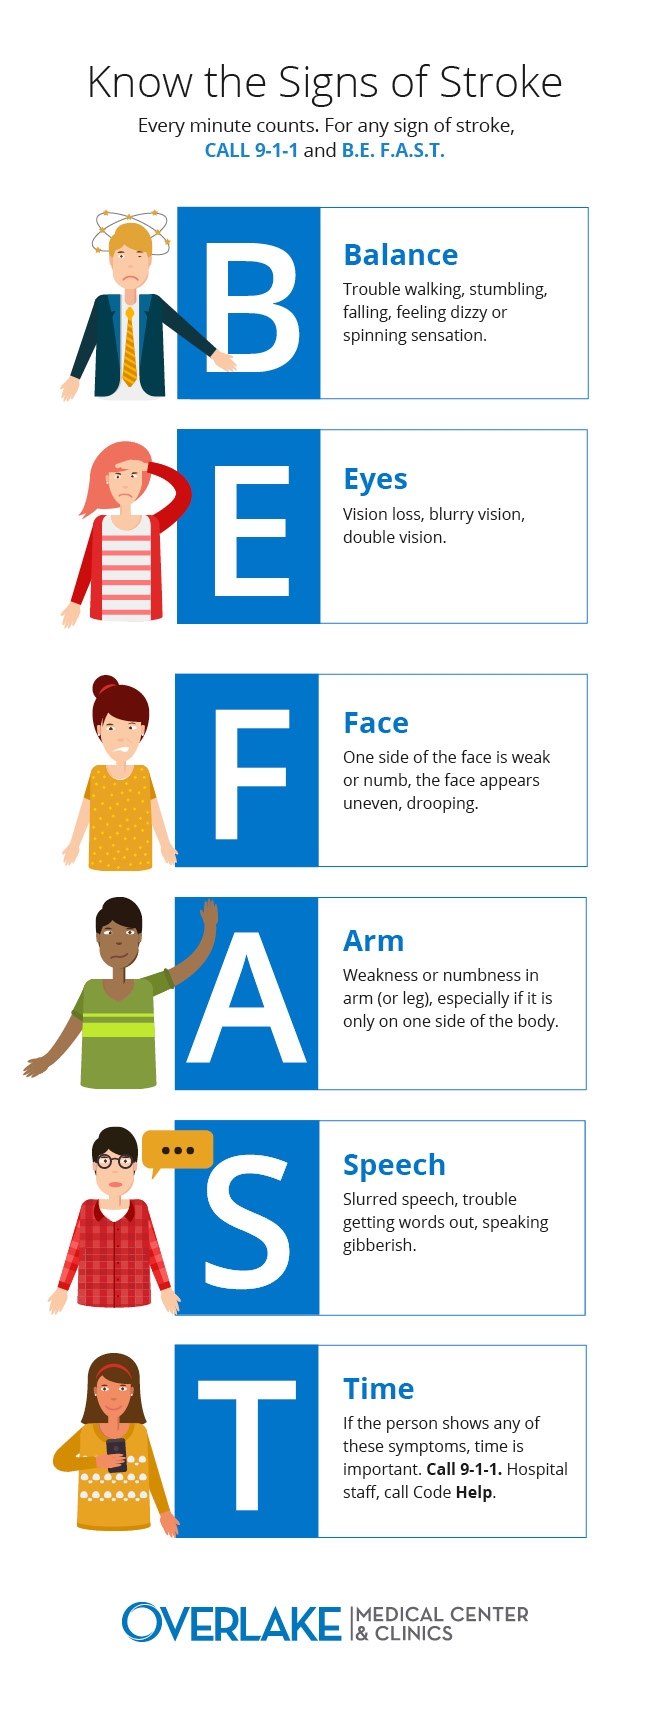 BEFAST stroke signs graphic